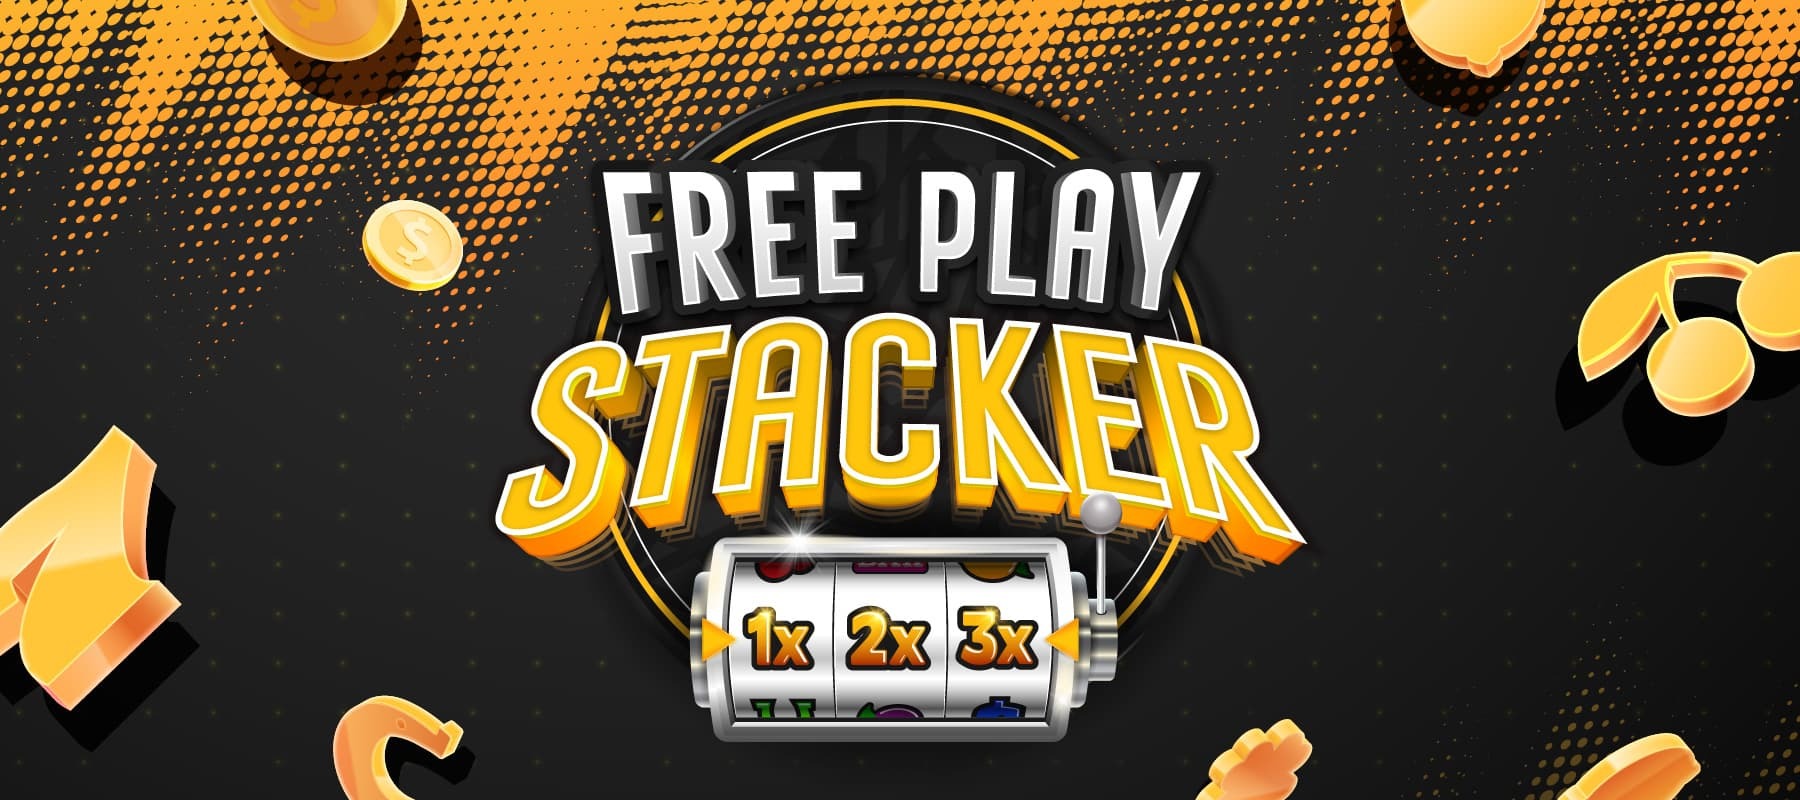 free play stacker promotion at YBR casino and sportsbook